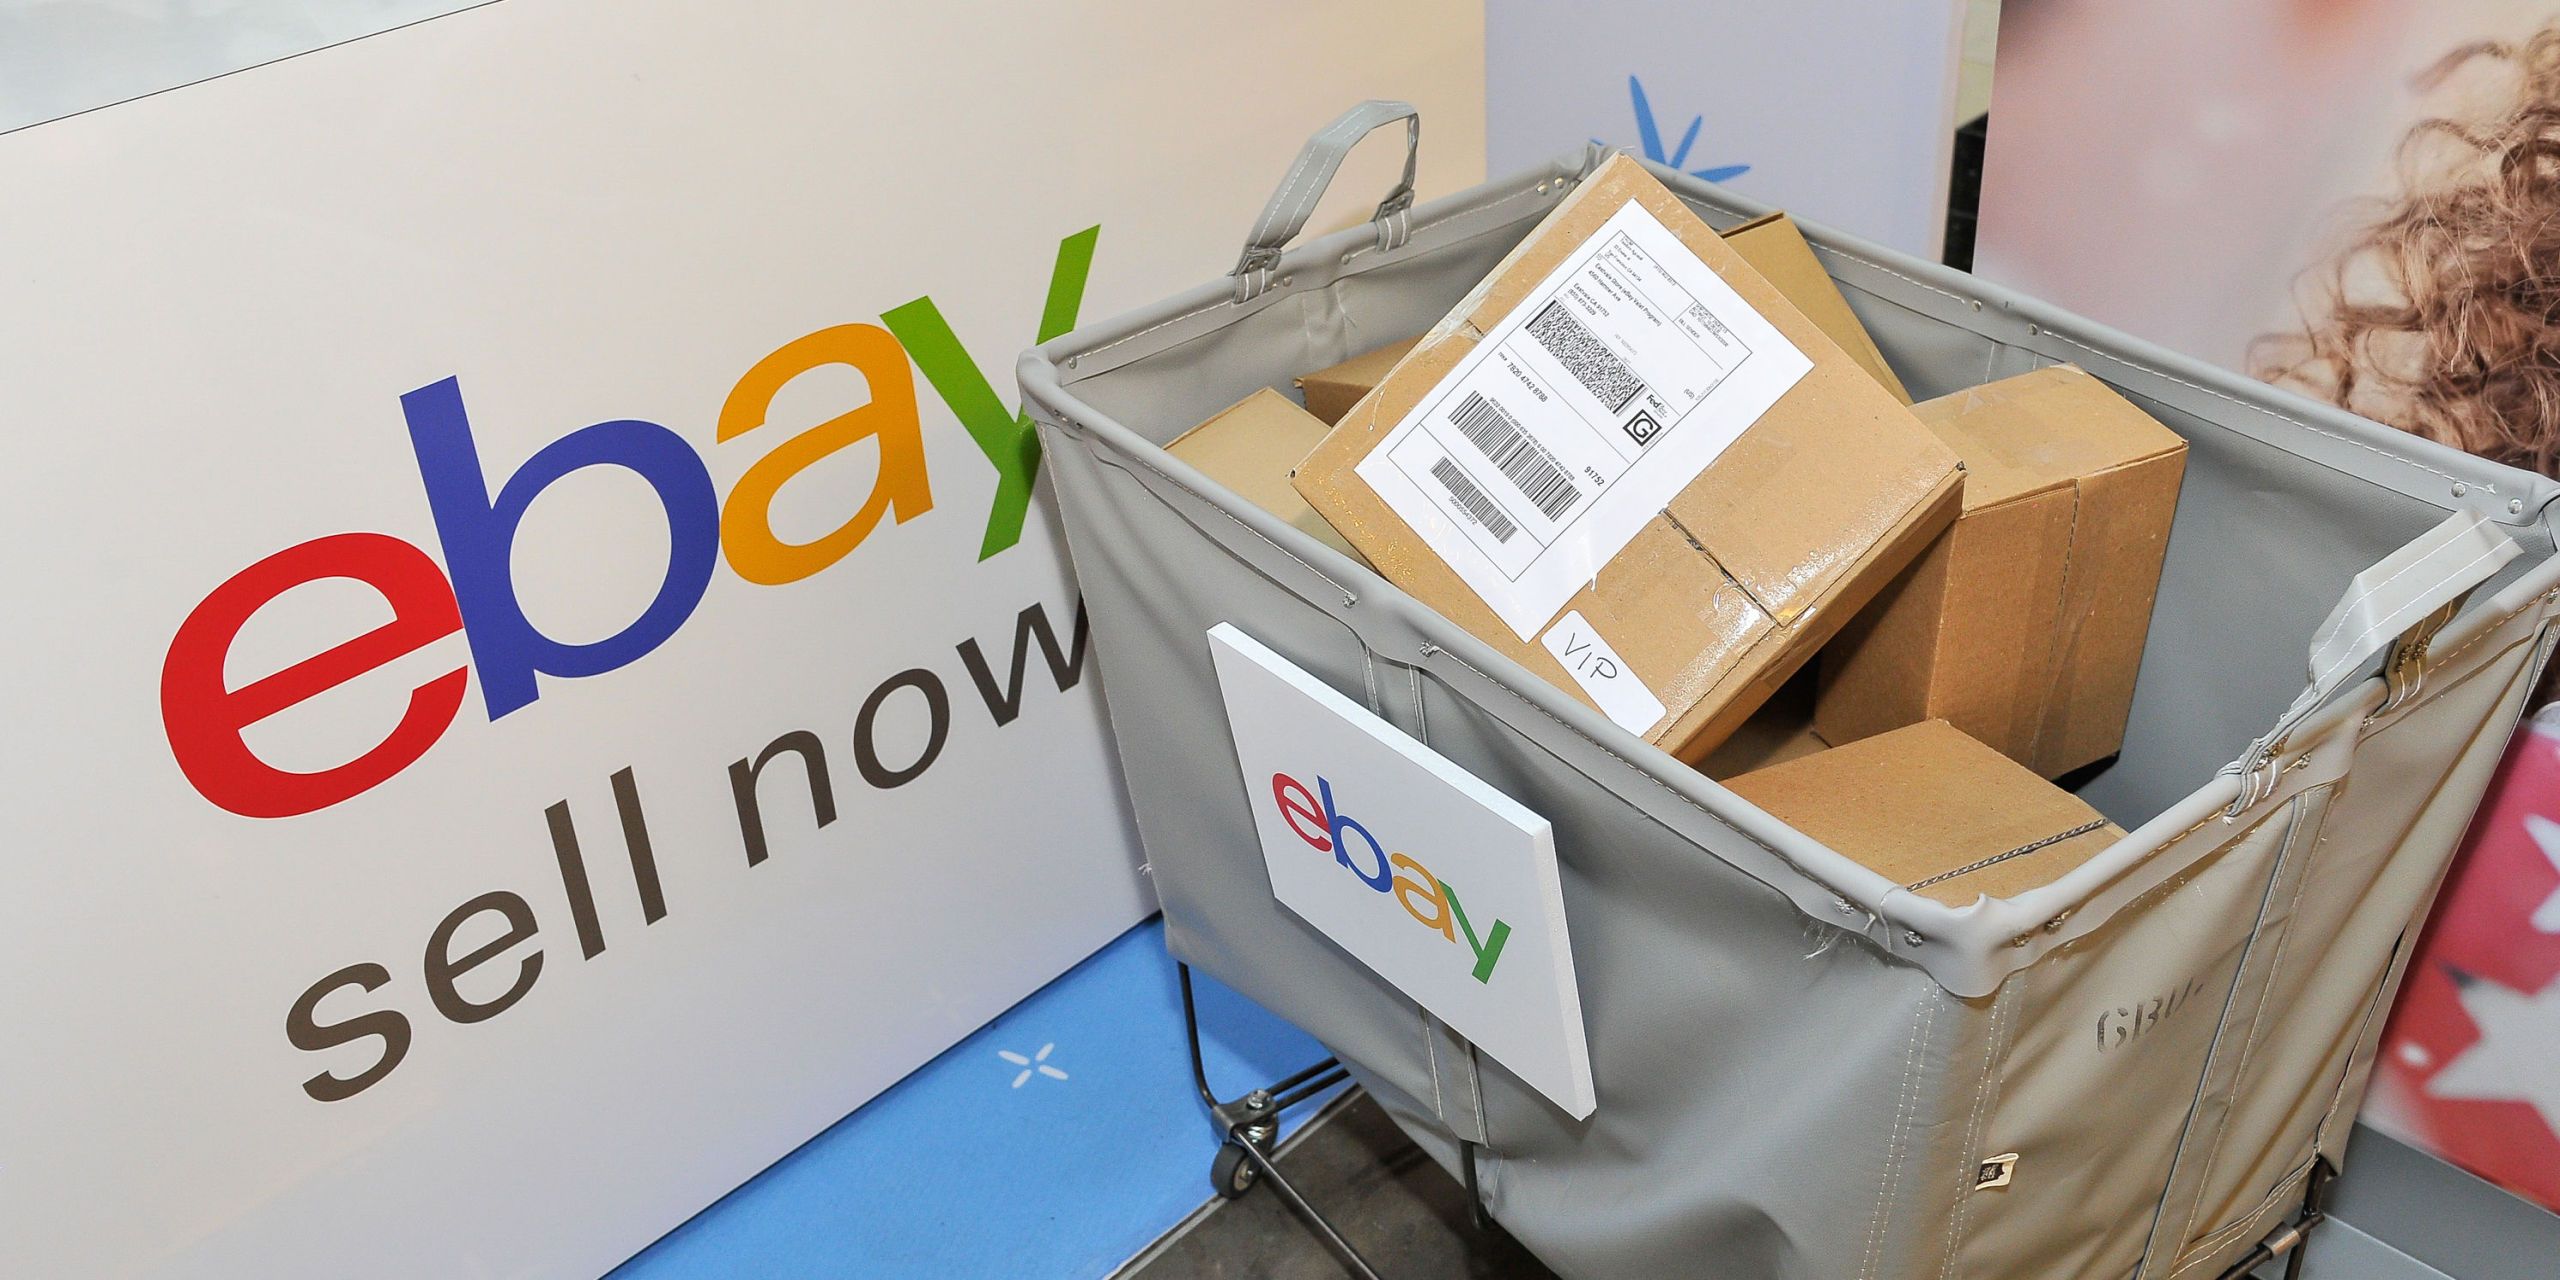 how to sell on ebay